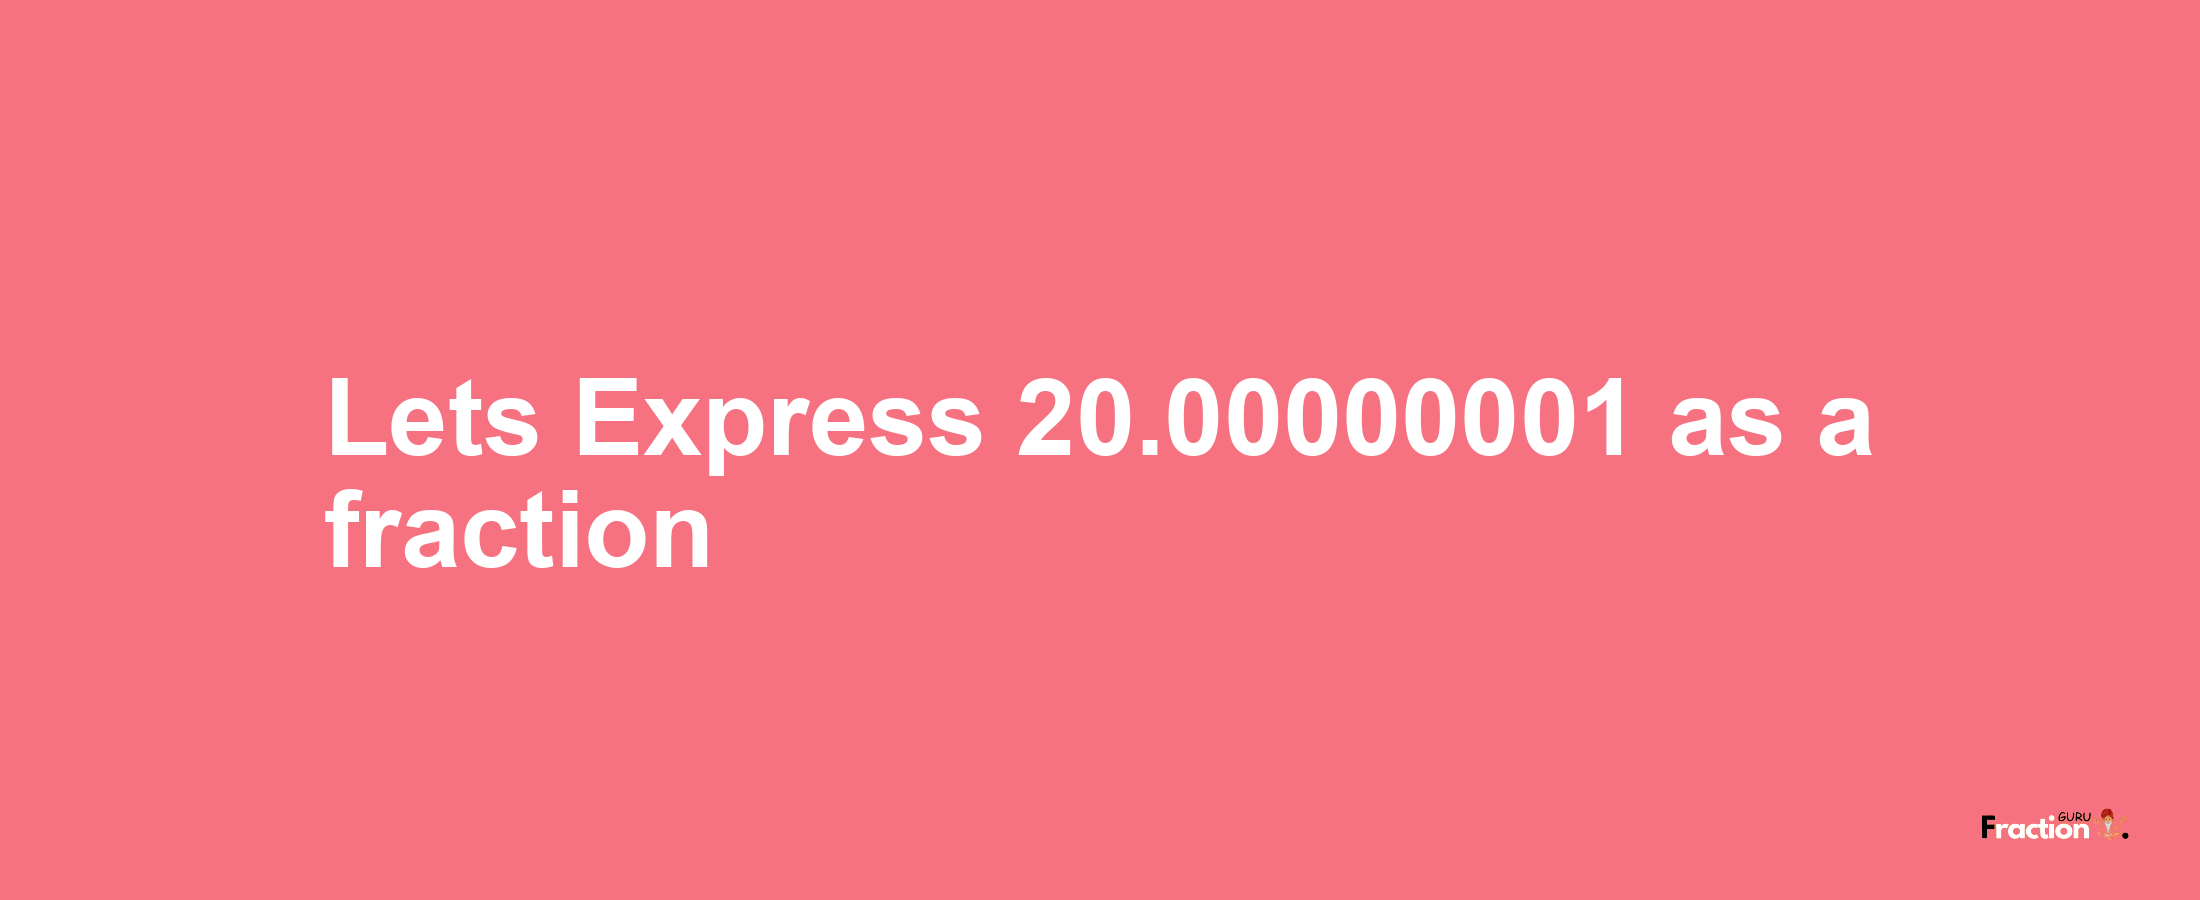 Lets Express 20.00000001 as afraction